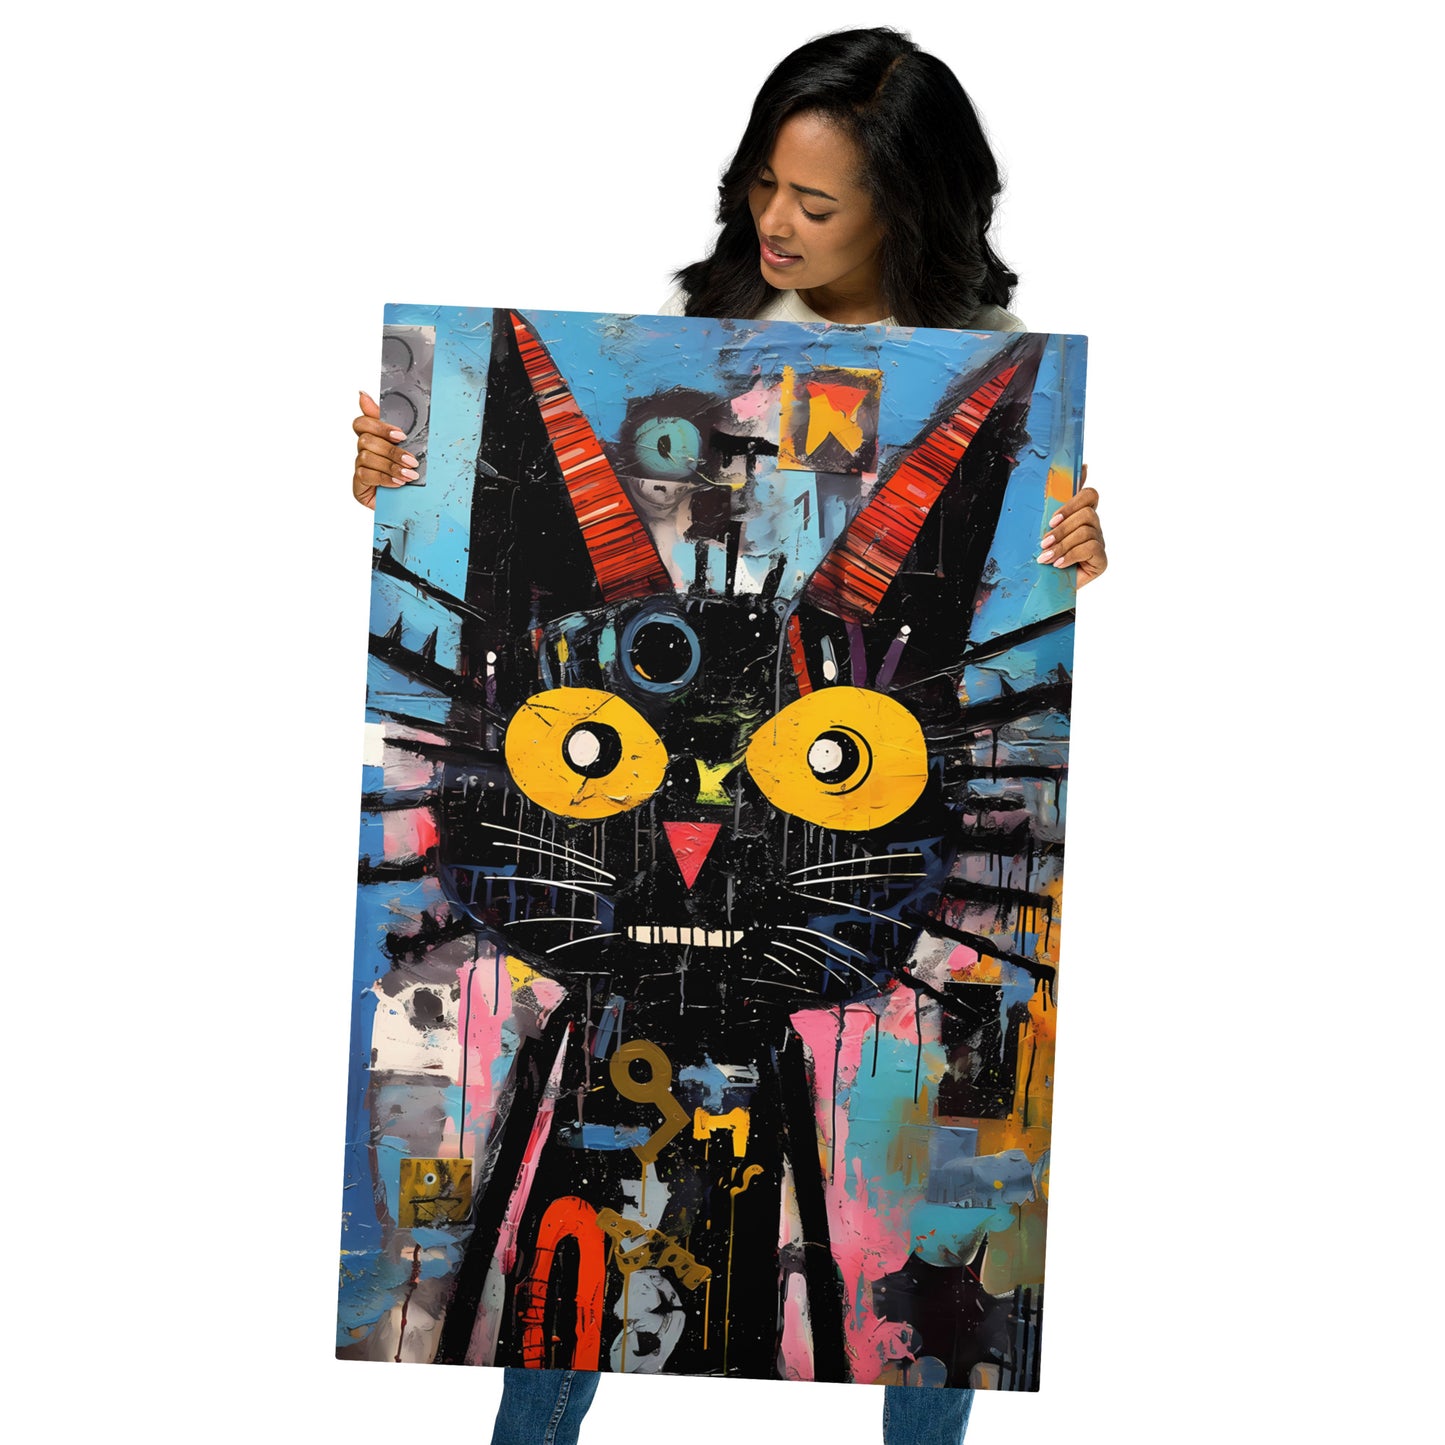 Abstract Metal Wall Art: Mysterious Black Cat and Colorful Splash